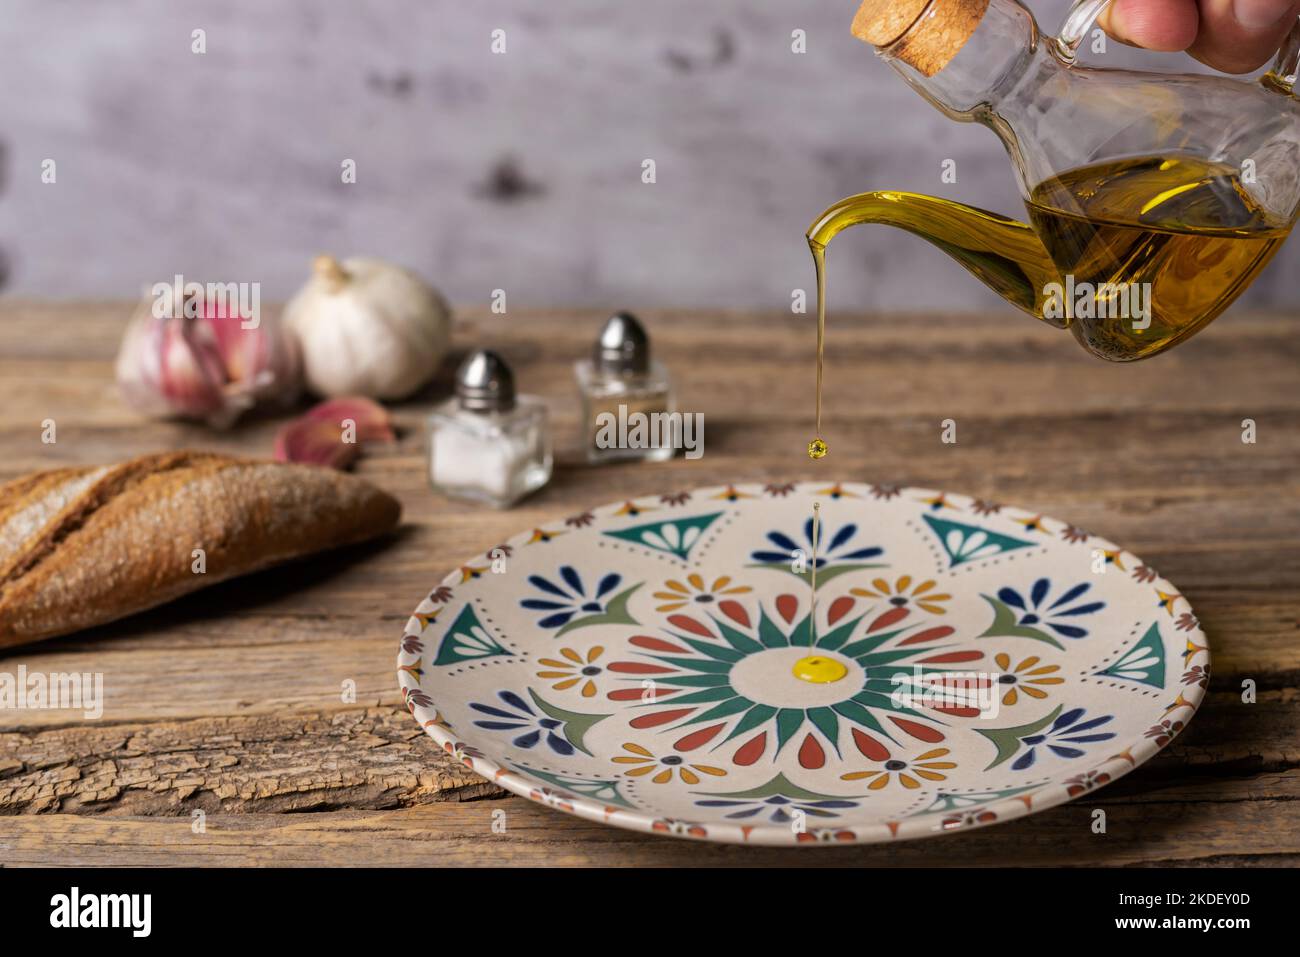 Extra virgin olive oil pouring from an oil can into a rustic round plate, on an old wooden table. Stock Photo